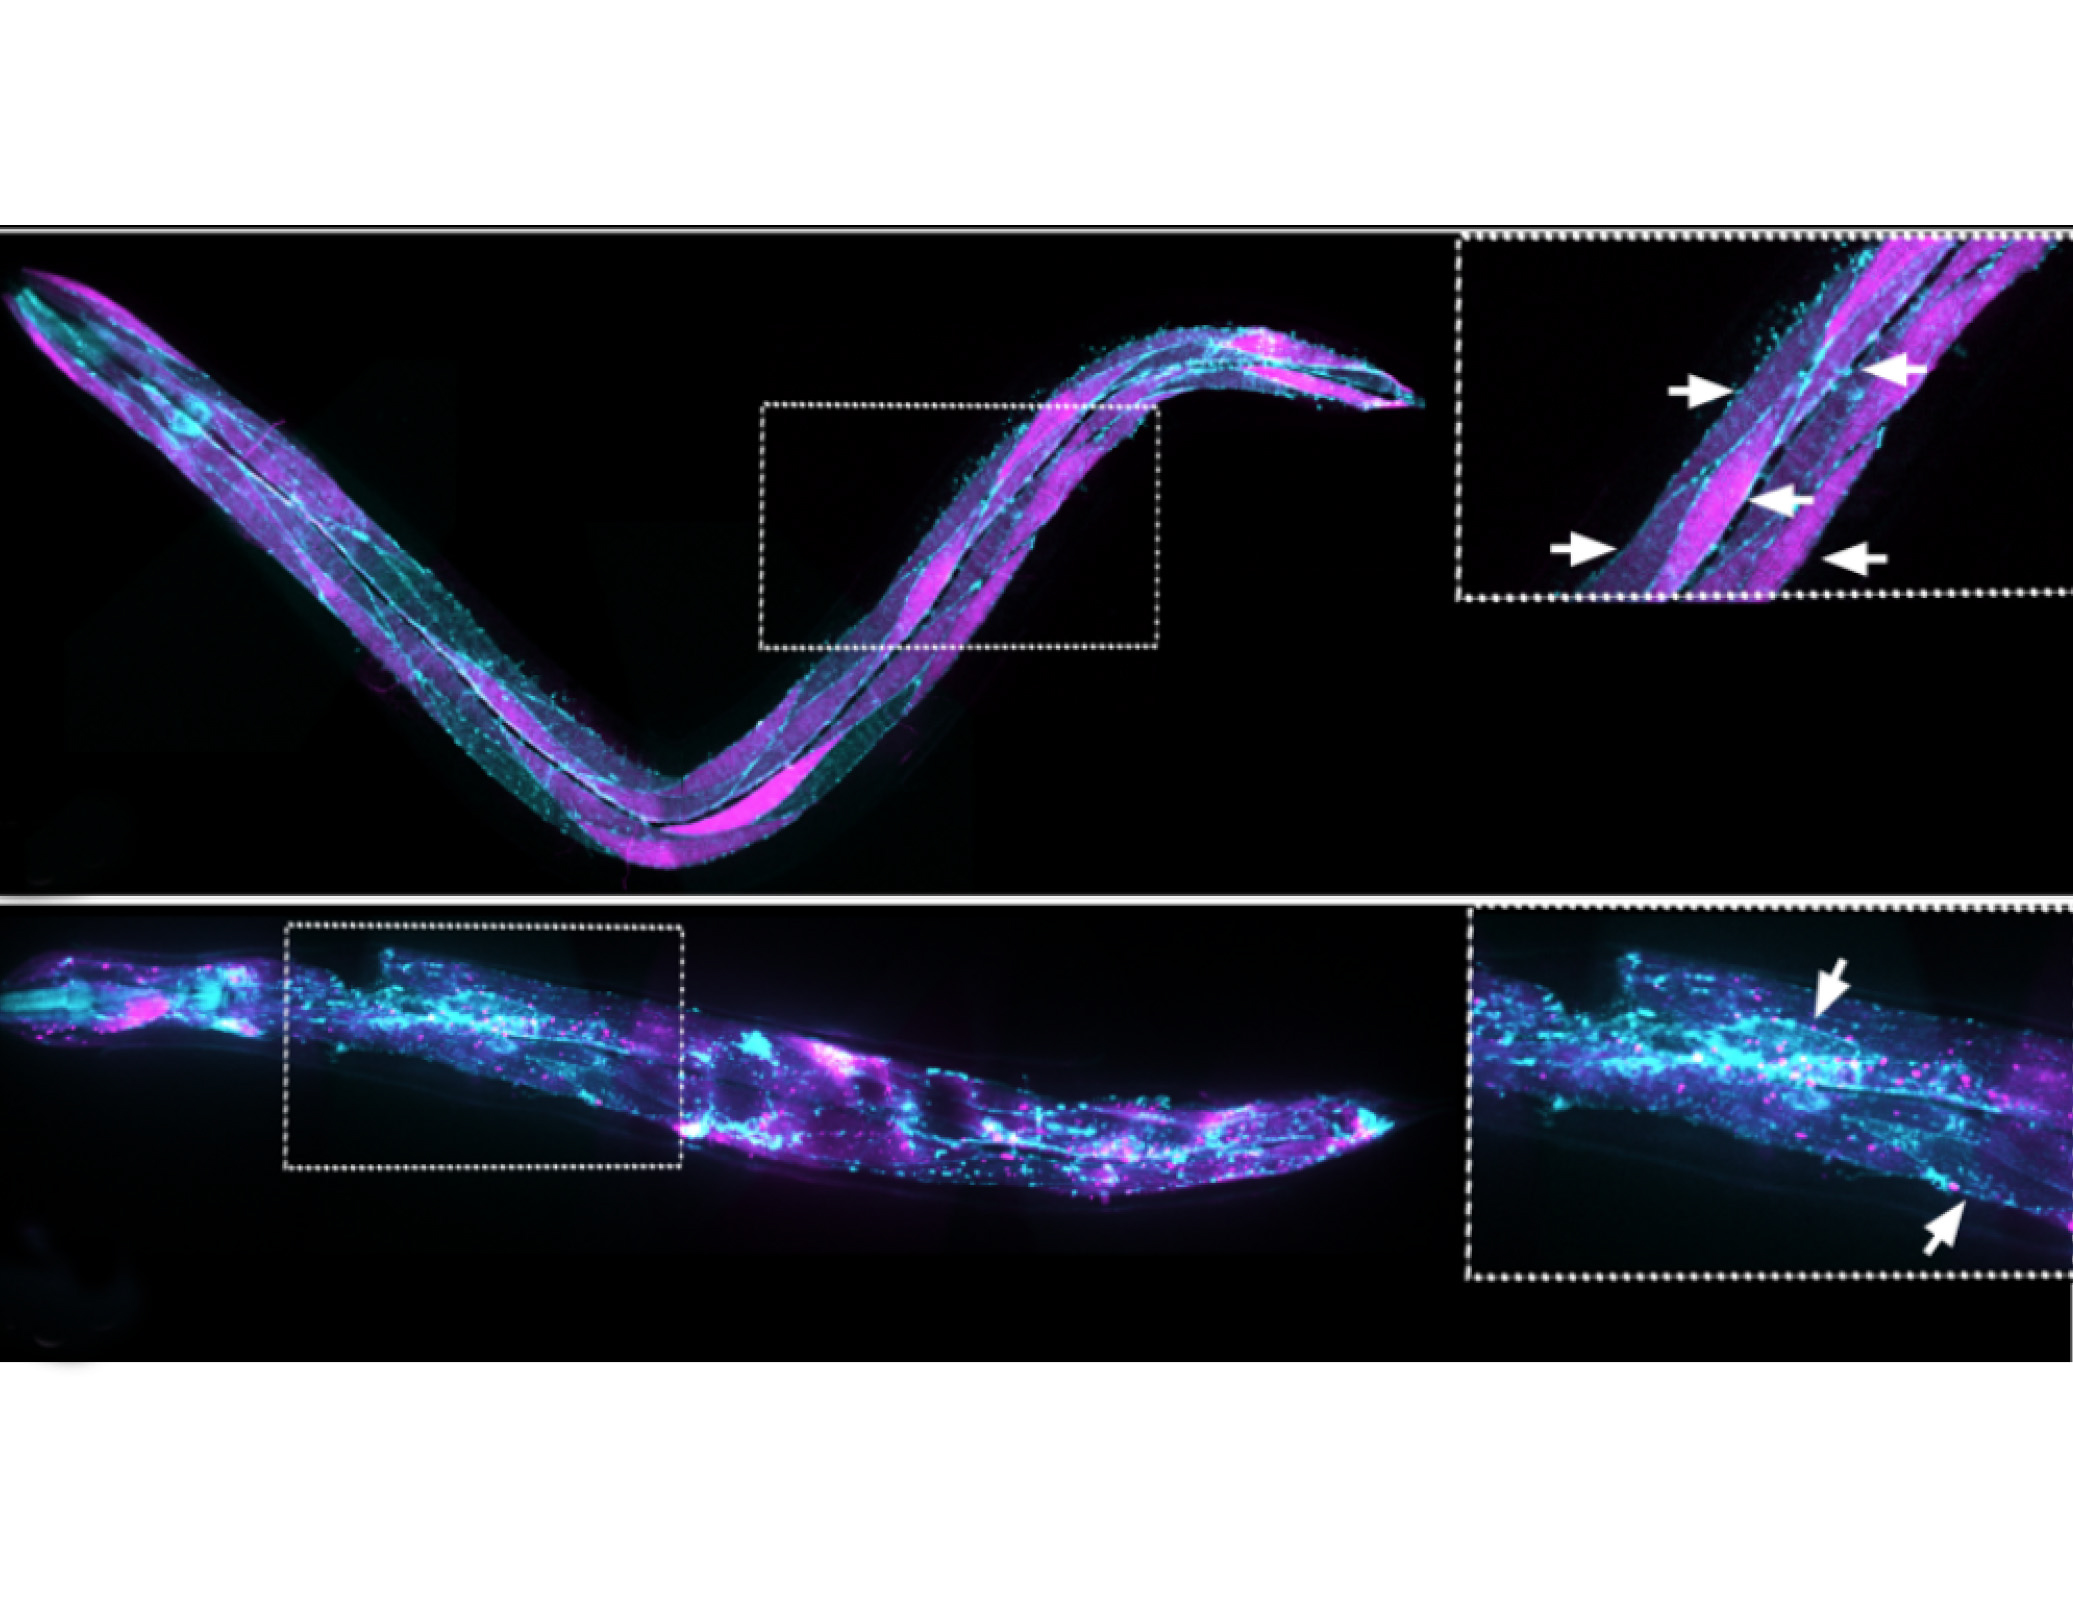 EFF-1 promotes muscle fusion, paralysis and retargets infection by AFF-1-coated viruses in C. elegans